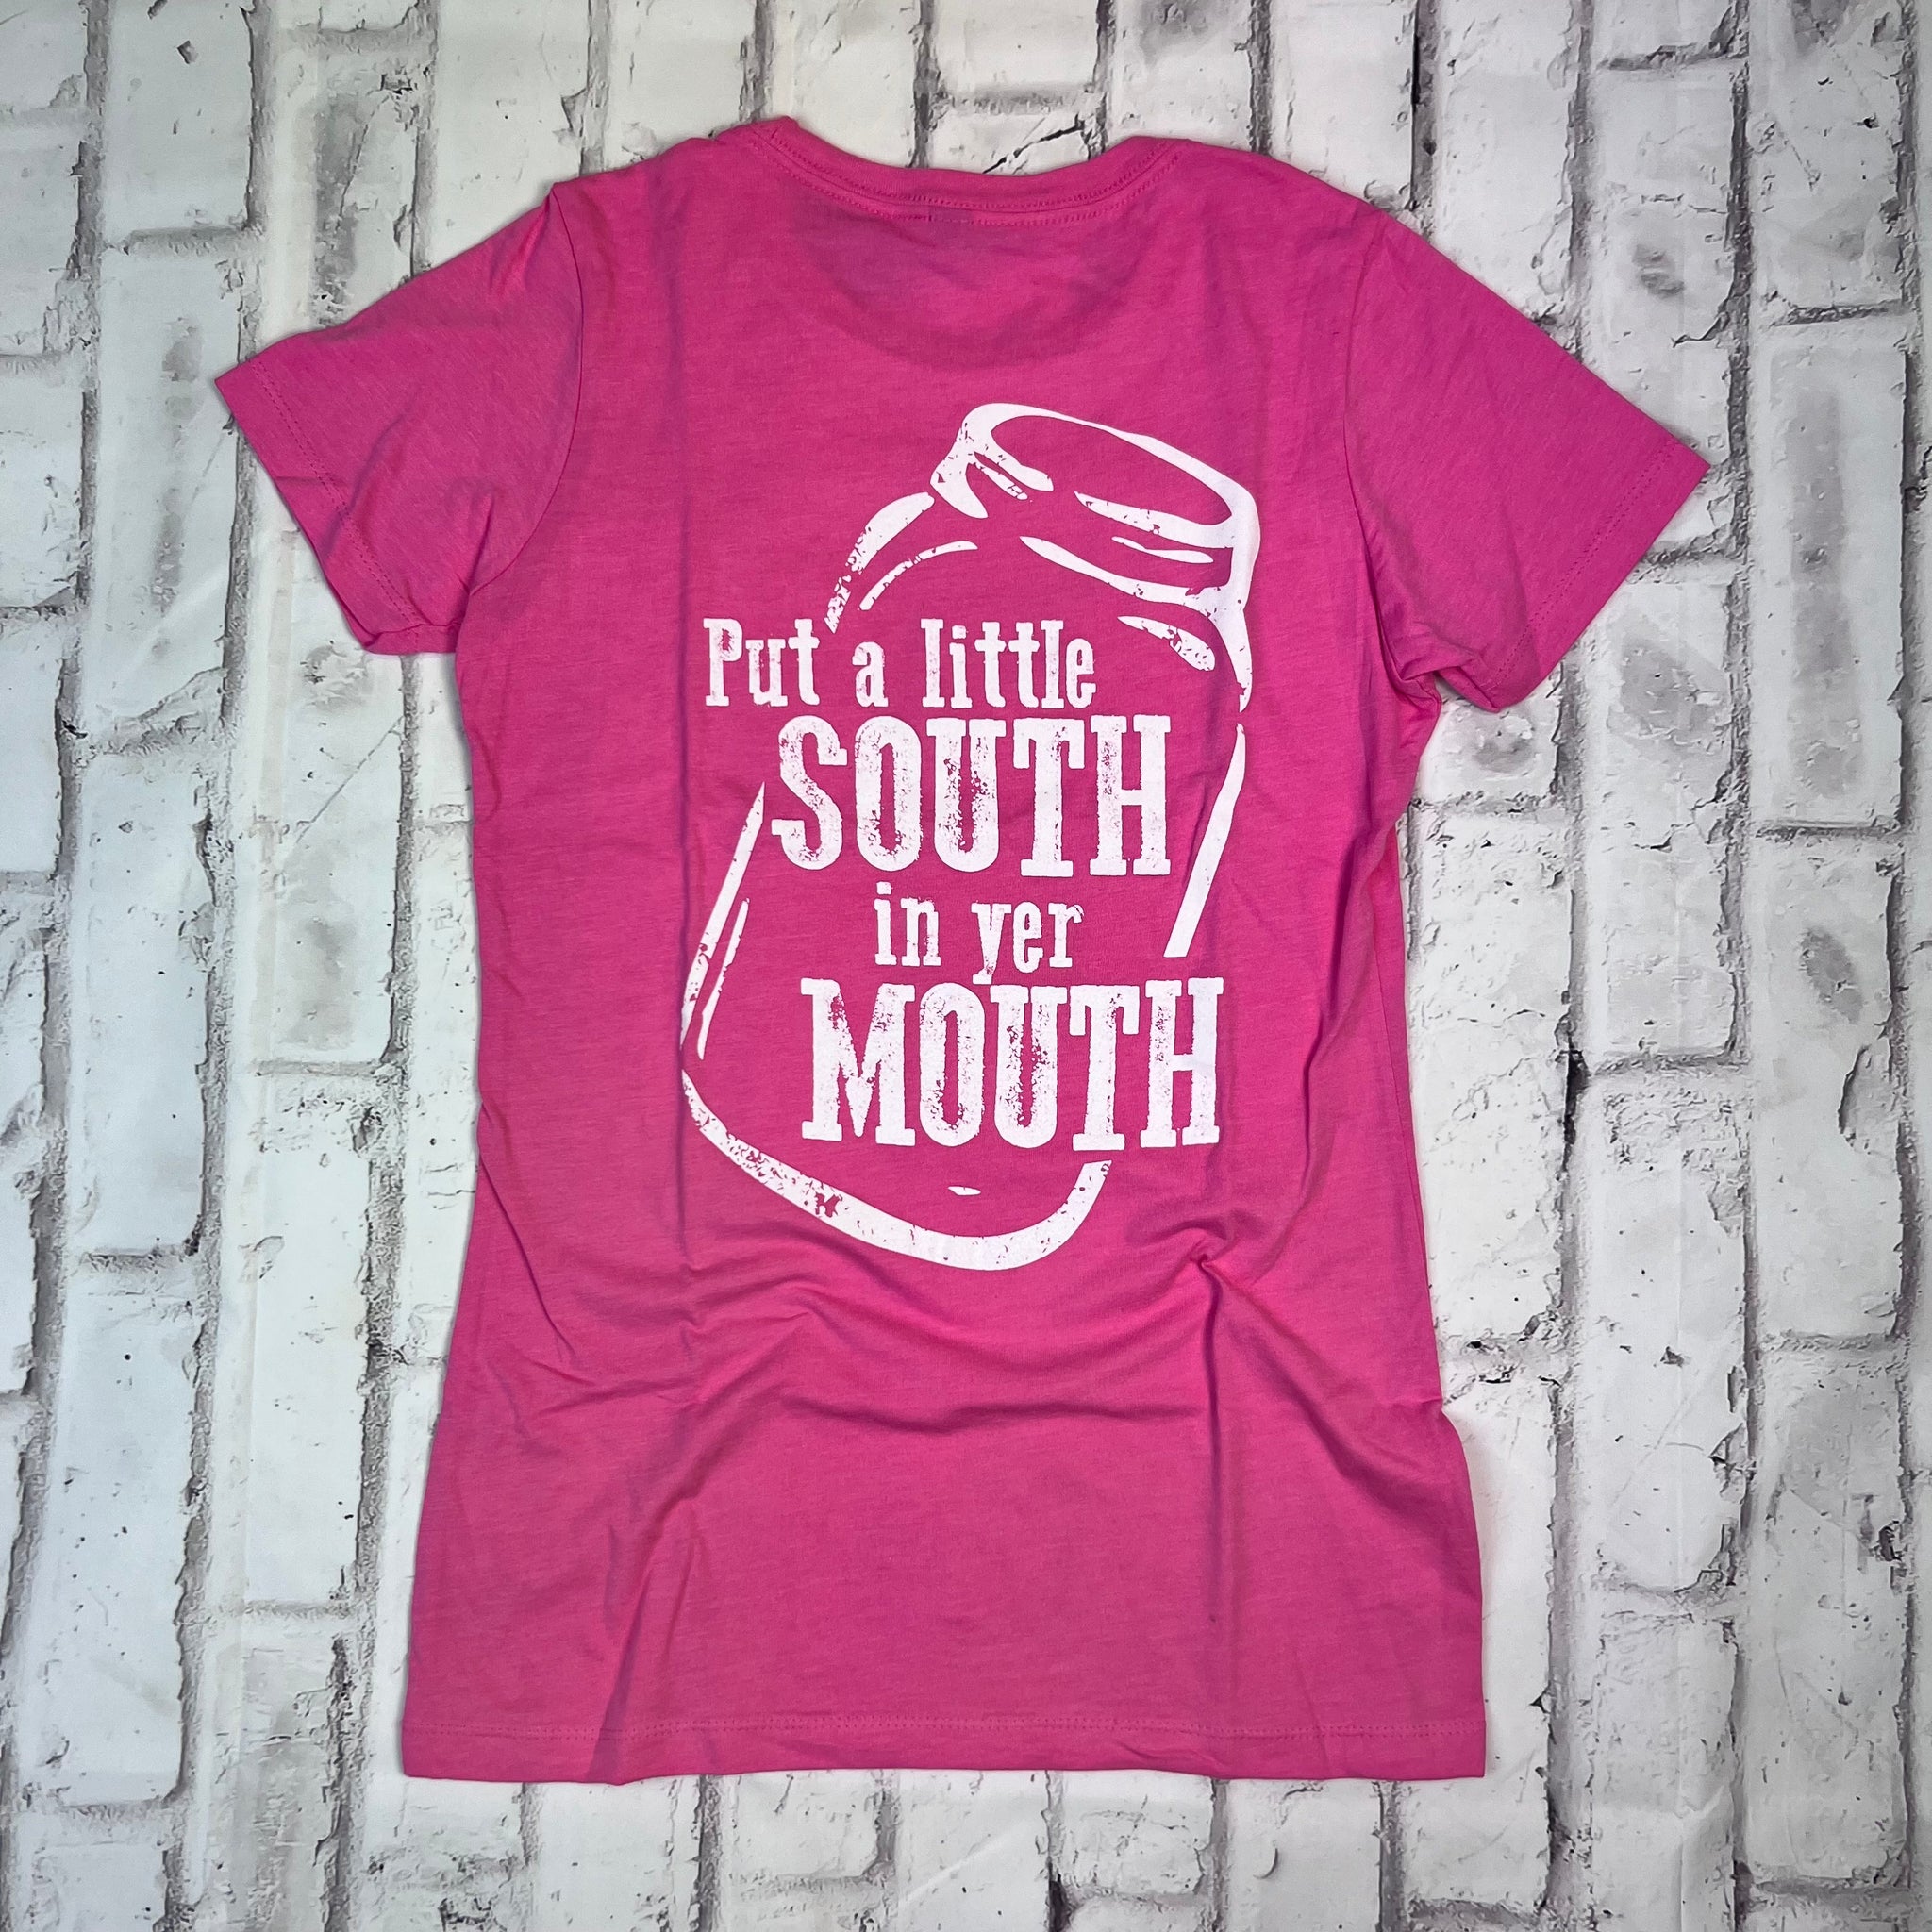 Southern Charm "Put a Little South in Your Mouth" Short Sleeve T-shirt - Hot Pink